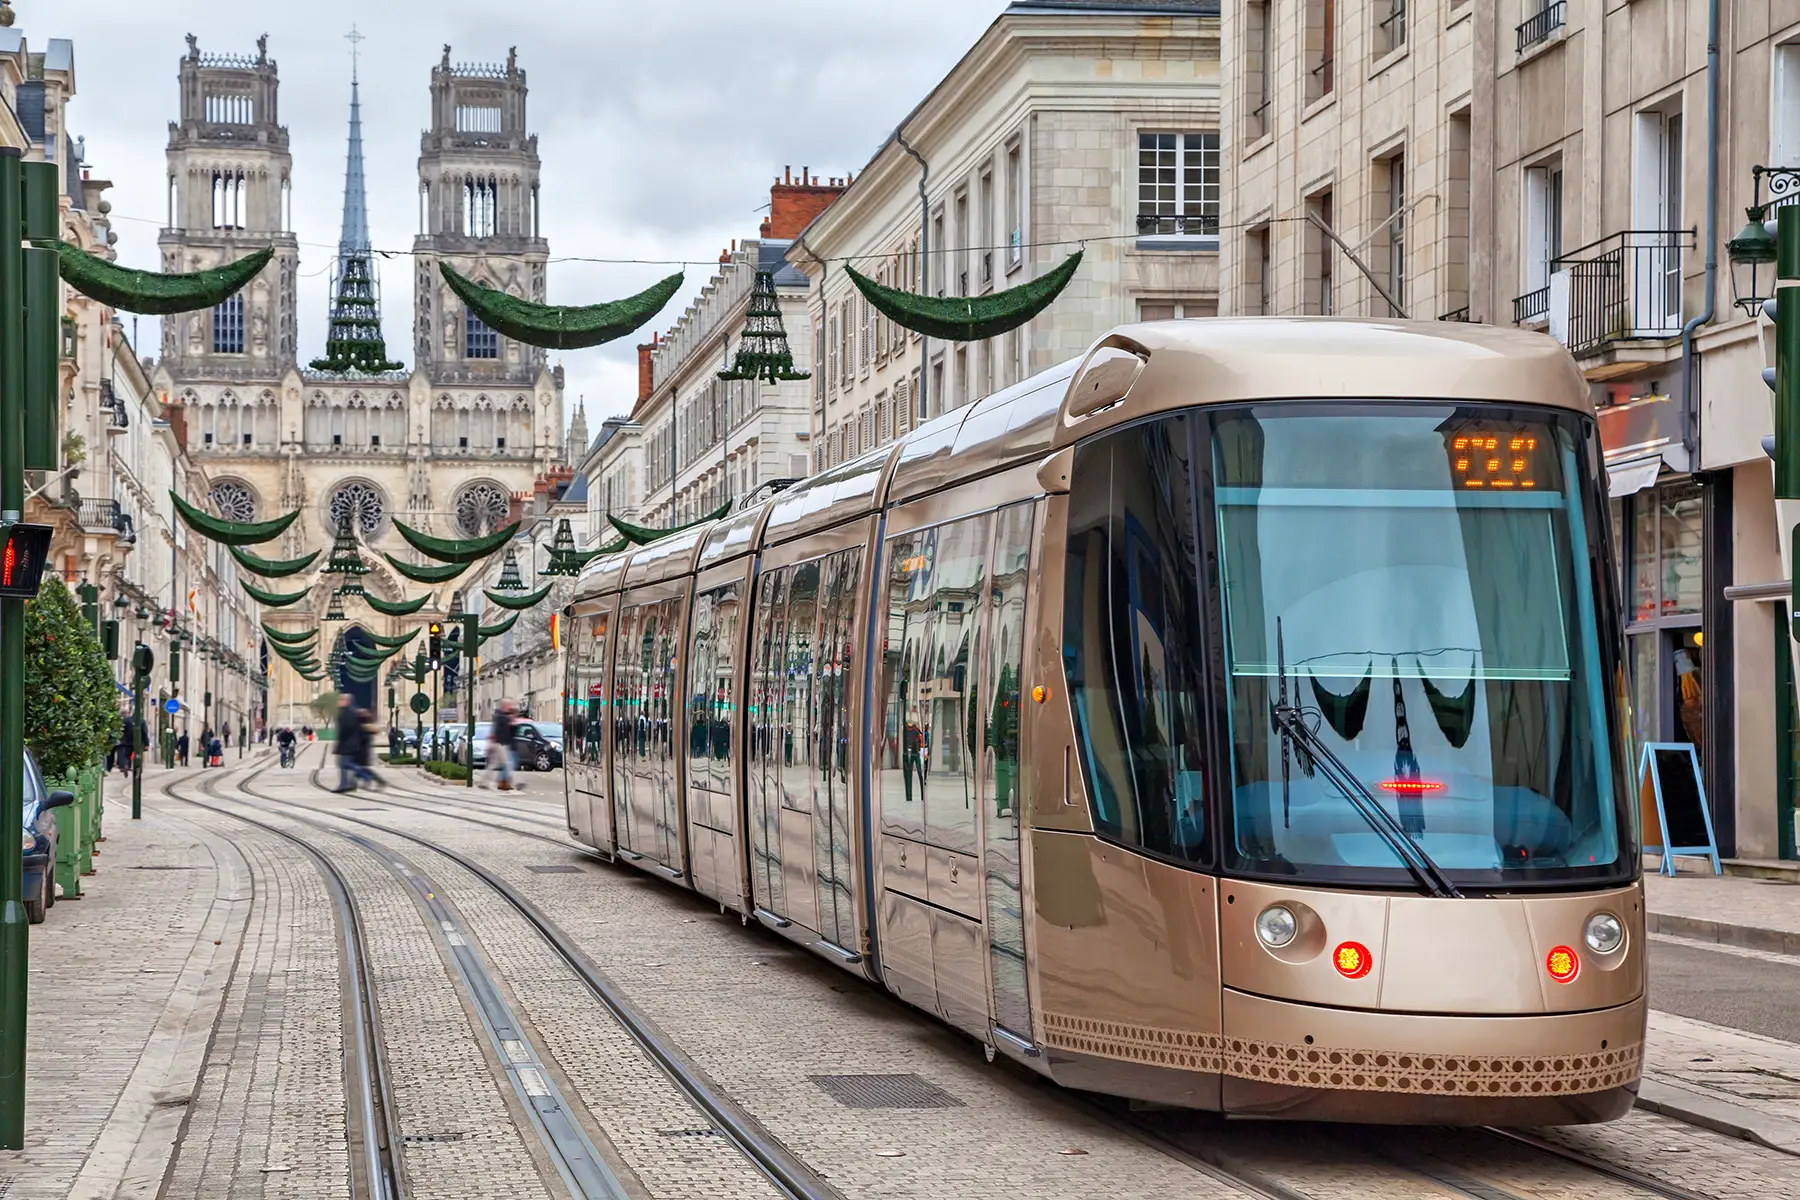 A tram in Orléans, France